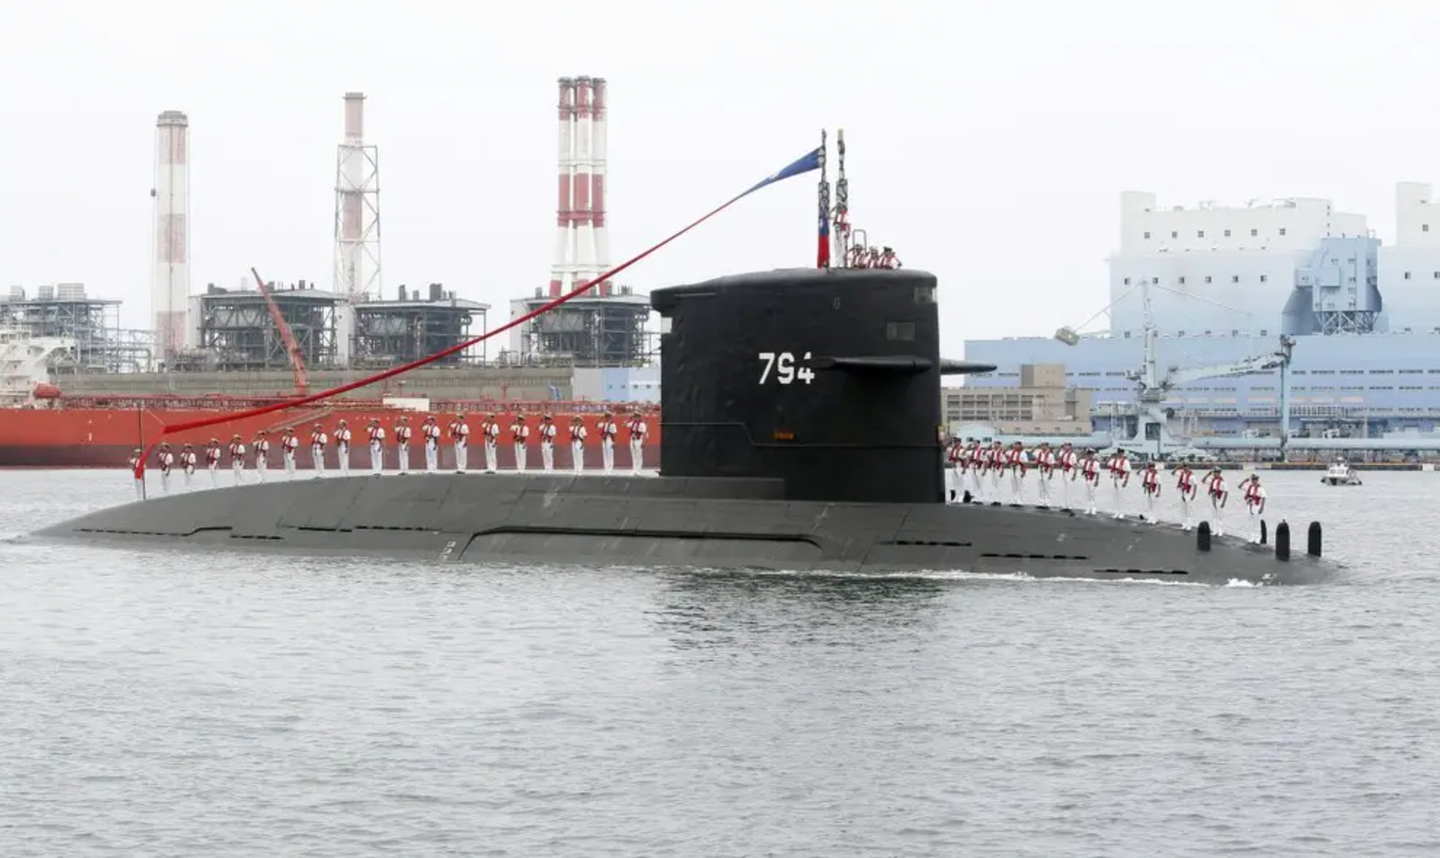 Taiwanese sailors salute aboard the&nbsp;<em>Hai Lung</em>&nbsp;class submarine&nbsp;<em>Hai Hu</em>, which was commissioned into ROCN service in 1988.&nbsp;<em>AP/Chiang Ying-ying</em>